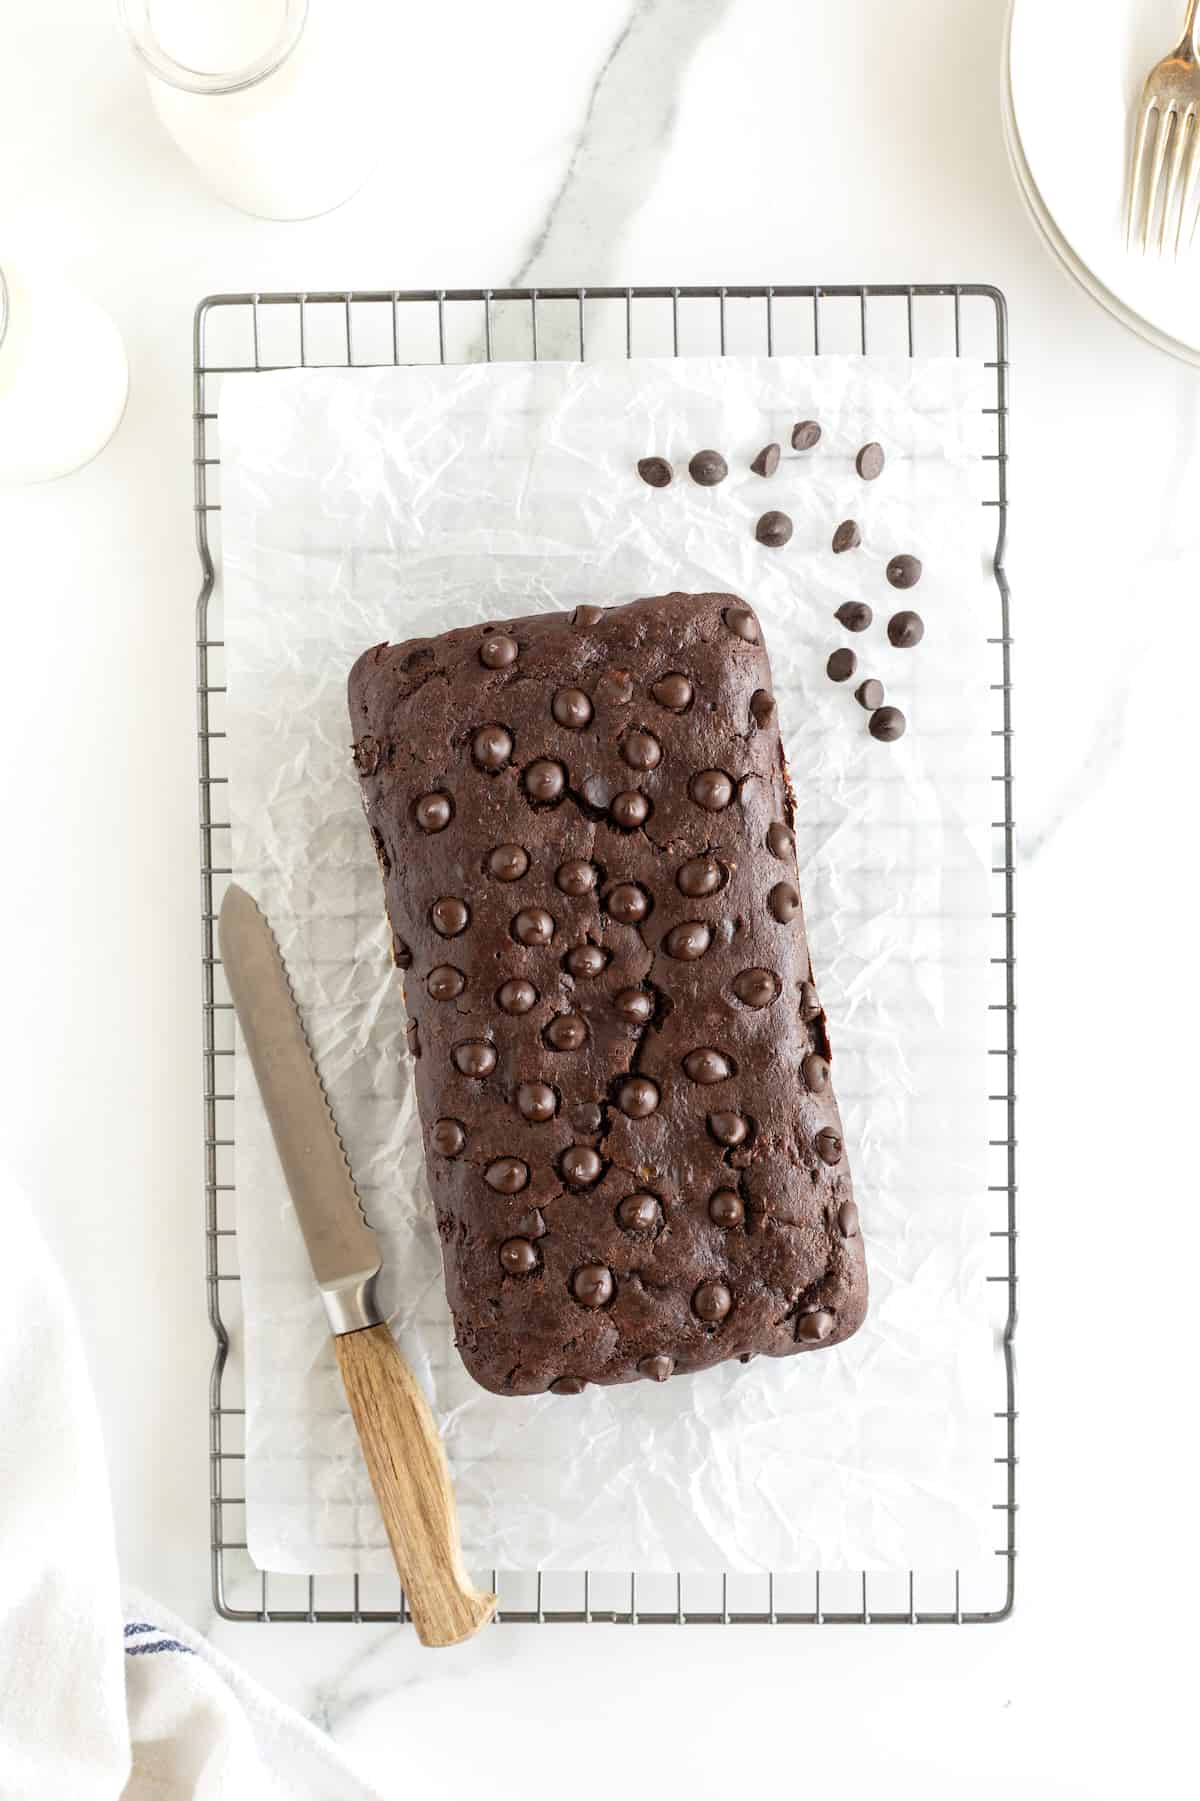 A loaf of chocolate banana bread on a parchment lined cooling rack with scattered chocolate chips and a bread knife.